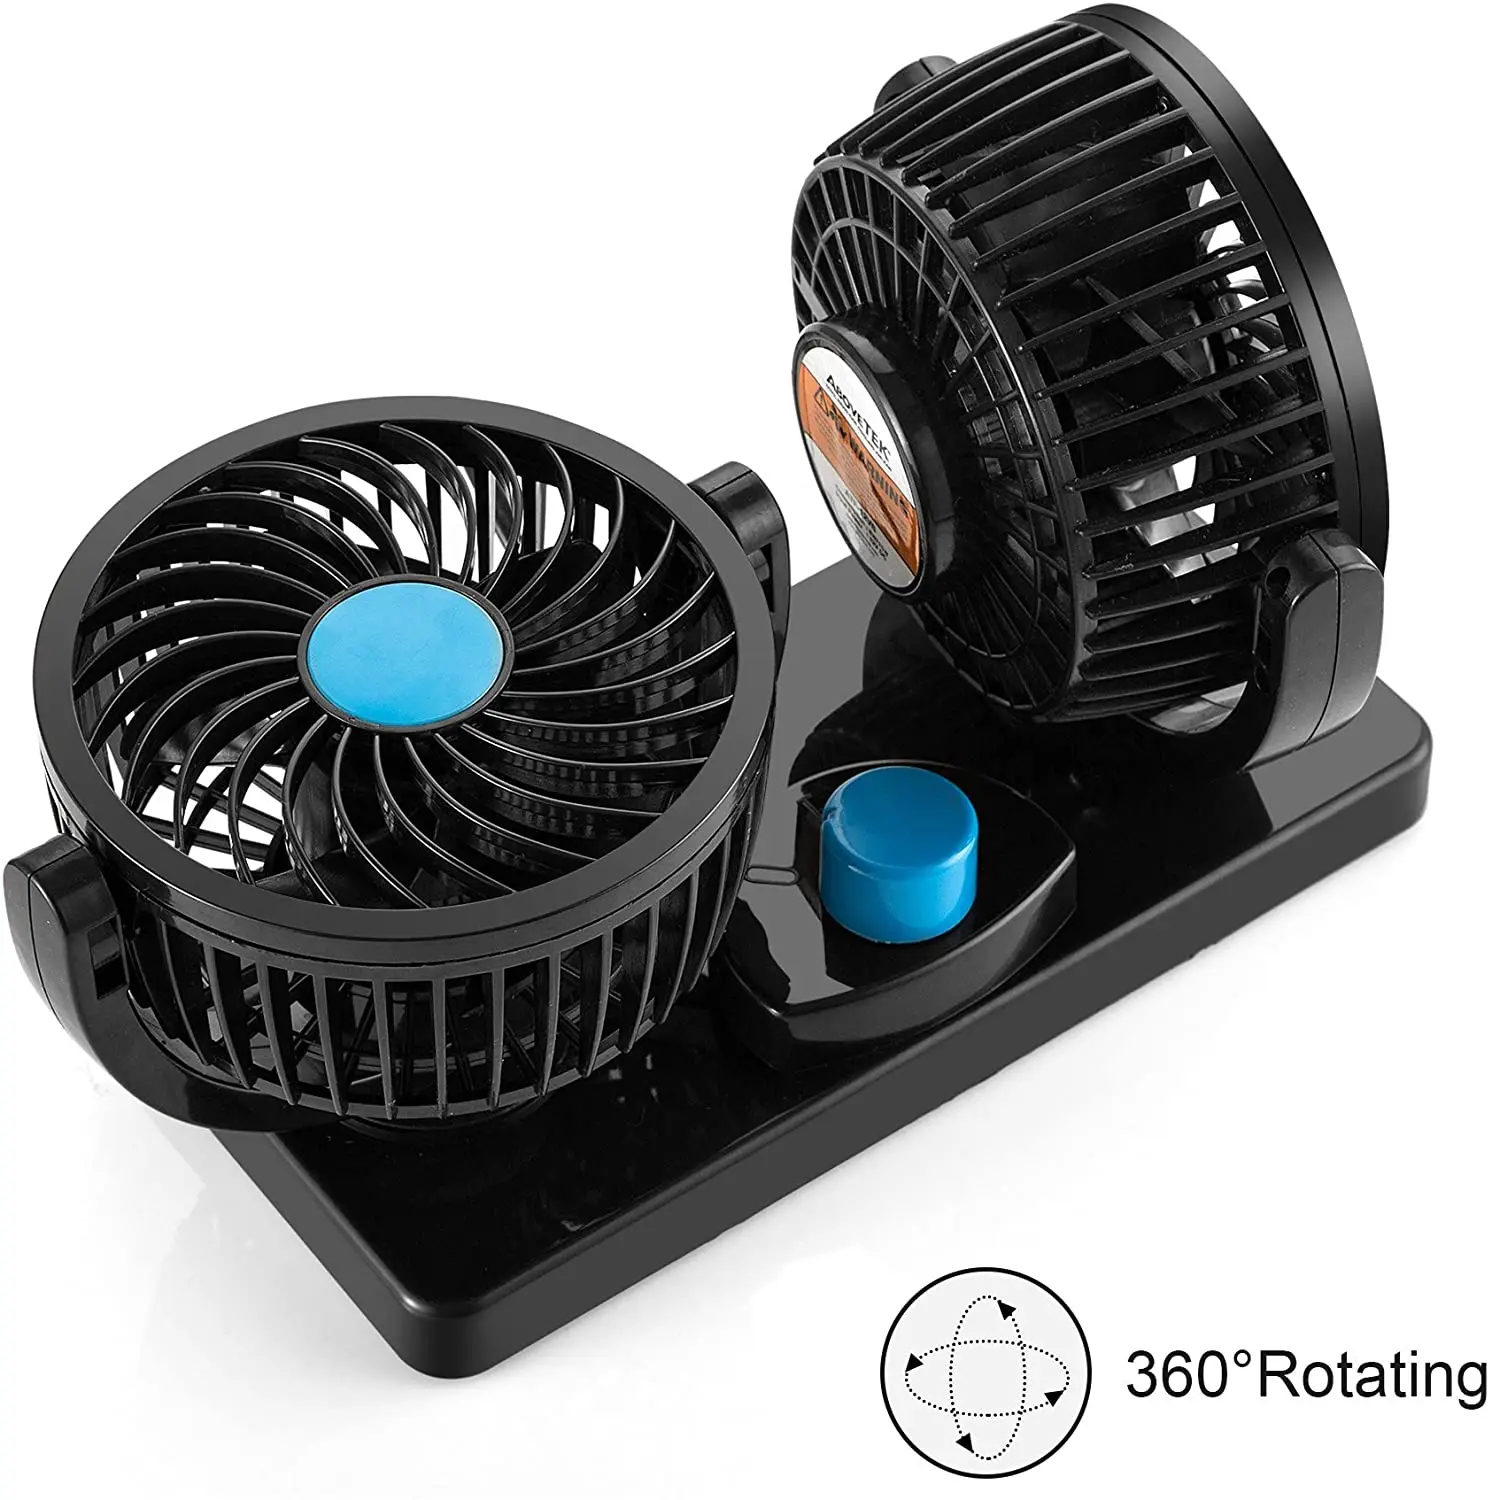 SUPERFASTRACING Car Fans 12V Dashboard Electric Auto Cooling Fan 360 Degree Rotatable Dual Head with 2 Speed Adjustable for Sedan SUV RV Boat